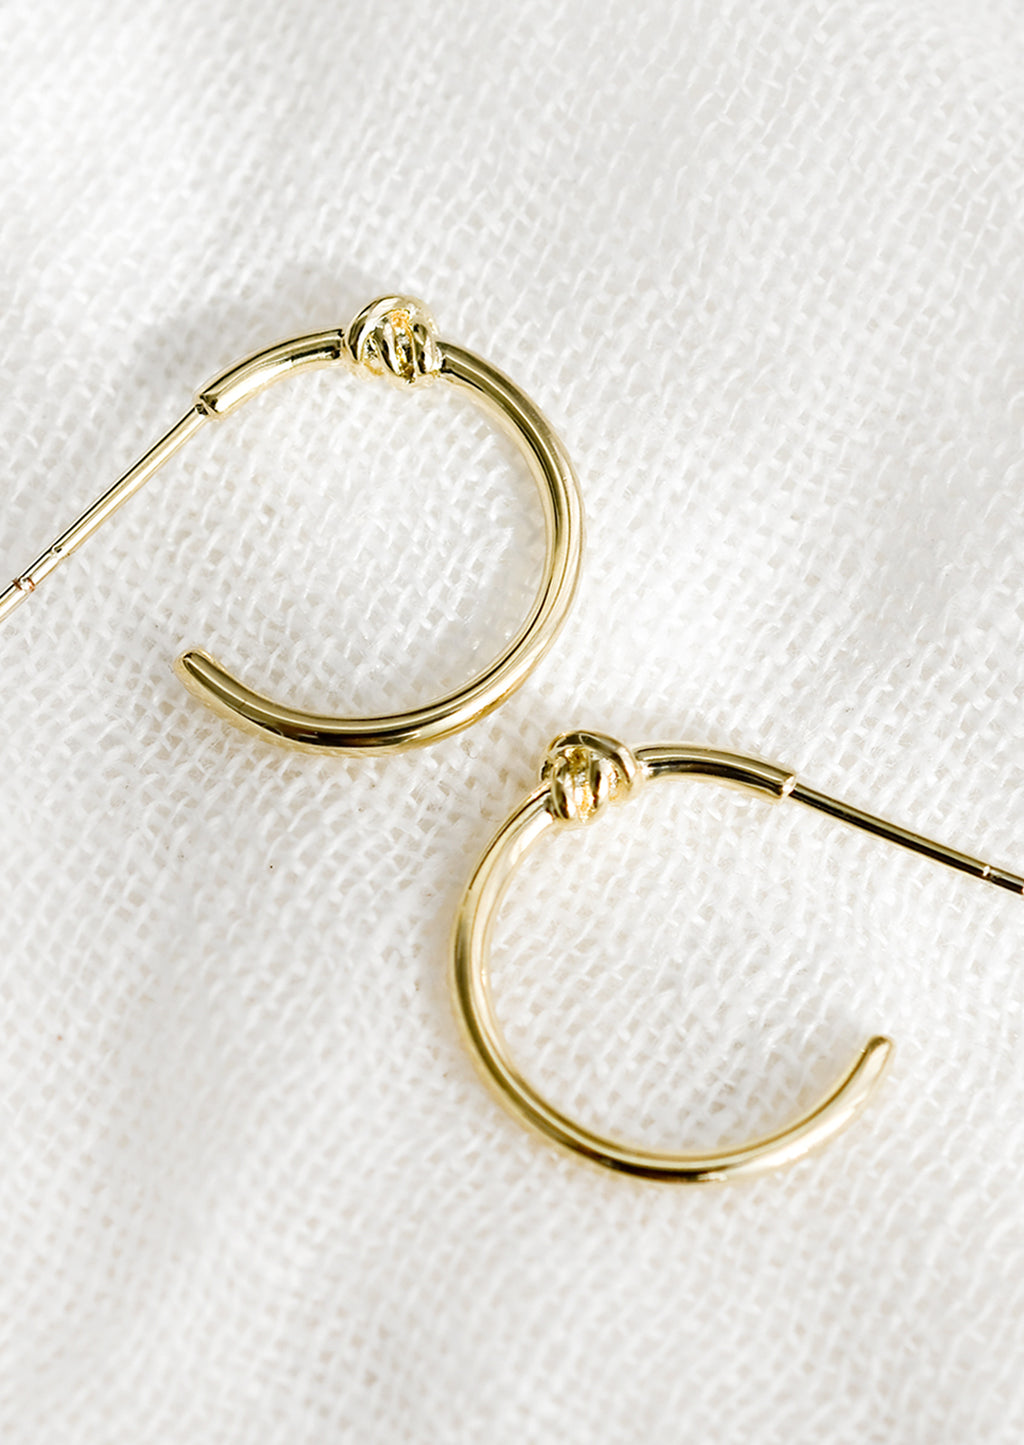 1: A pair of gold hoop earrings with single knot detail at top.